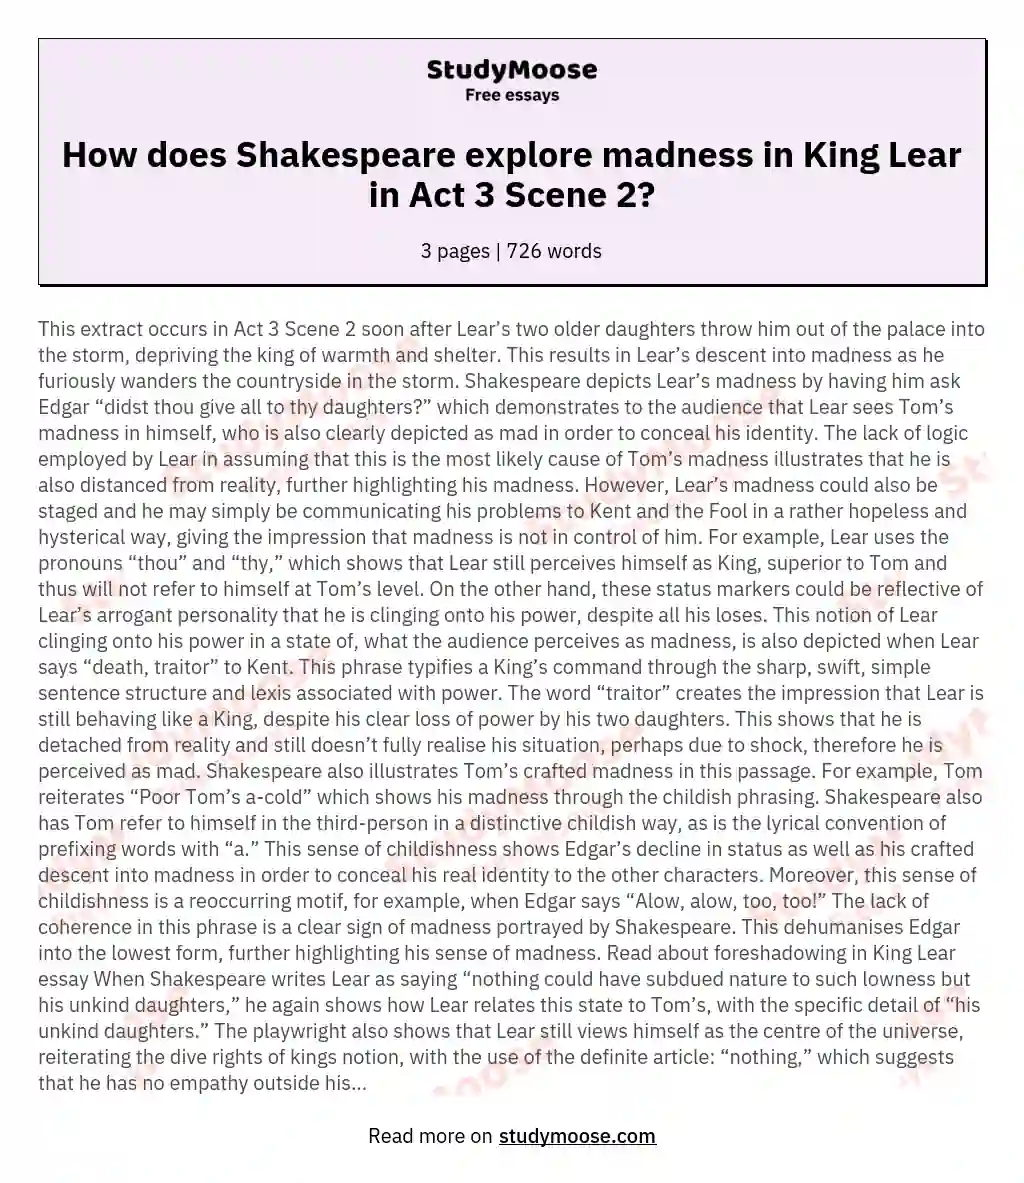 How does Shakespeare explore madness in King Lear in Act 3 Scene 2?